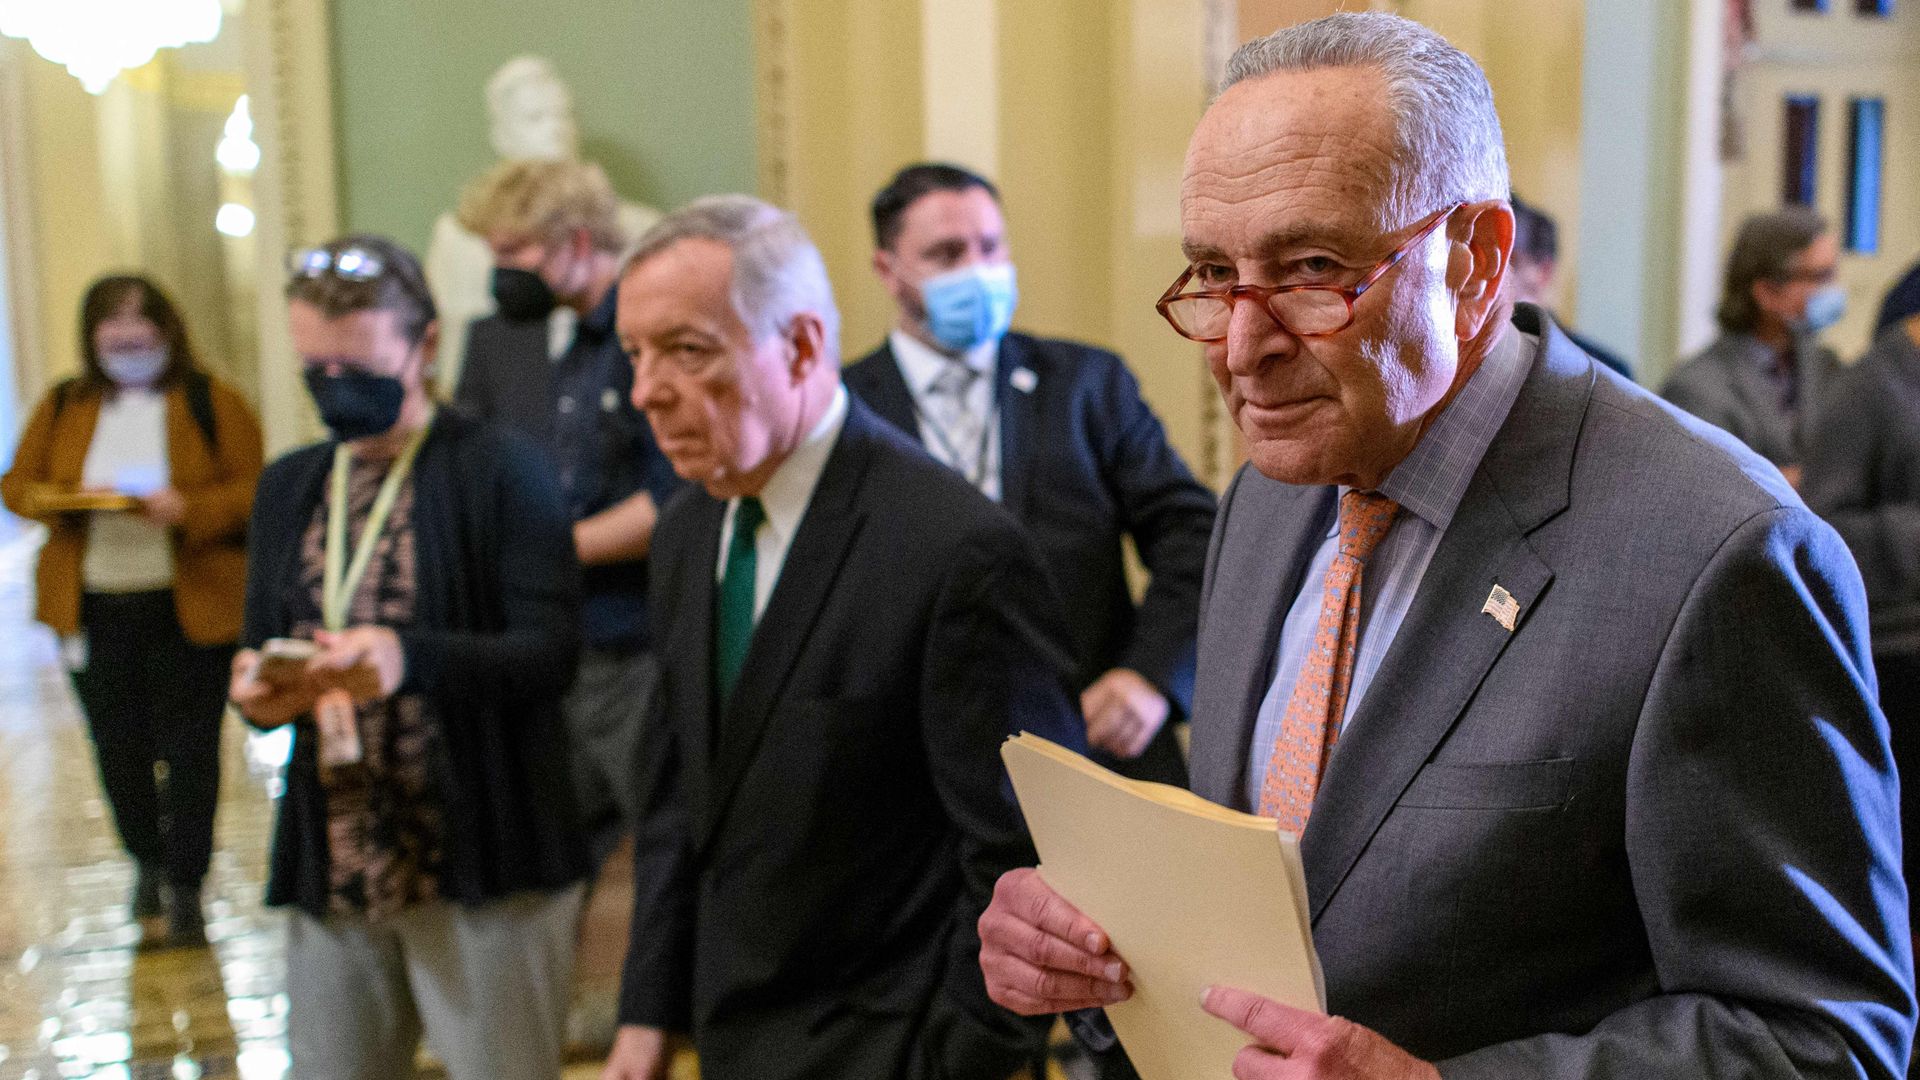 Senate Majority Leader Chuck Schumer (D- New York) and Majority Whip Dick Durbin (D-Illinois), head to the Senate Chamber after speaking to reporters at the US Capitol